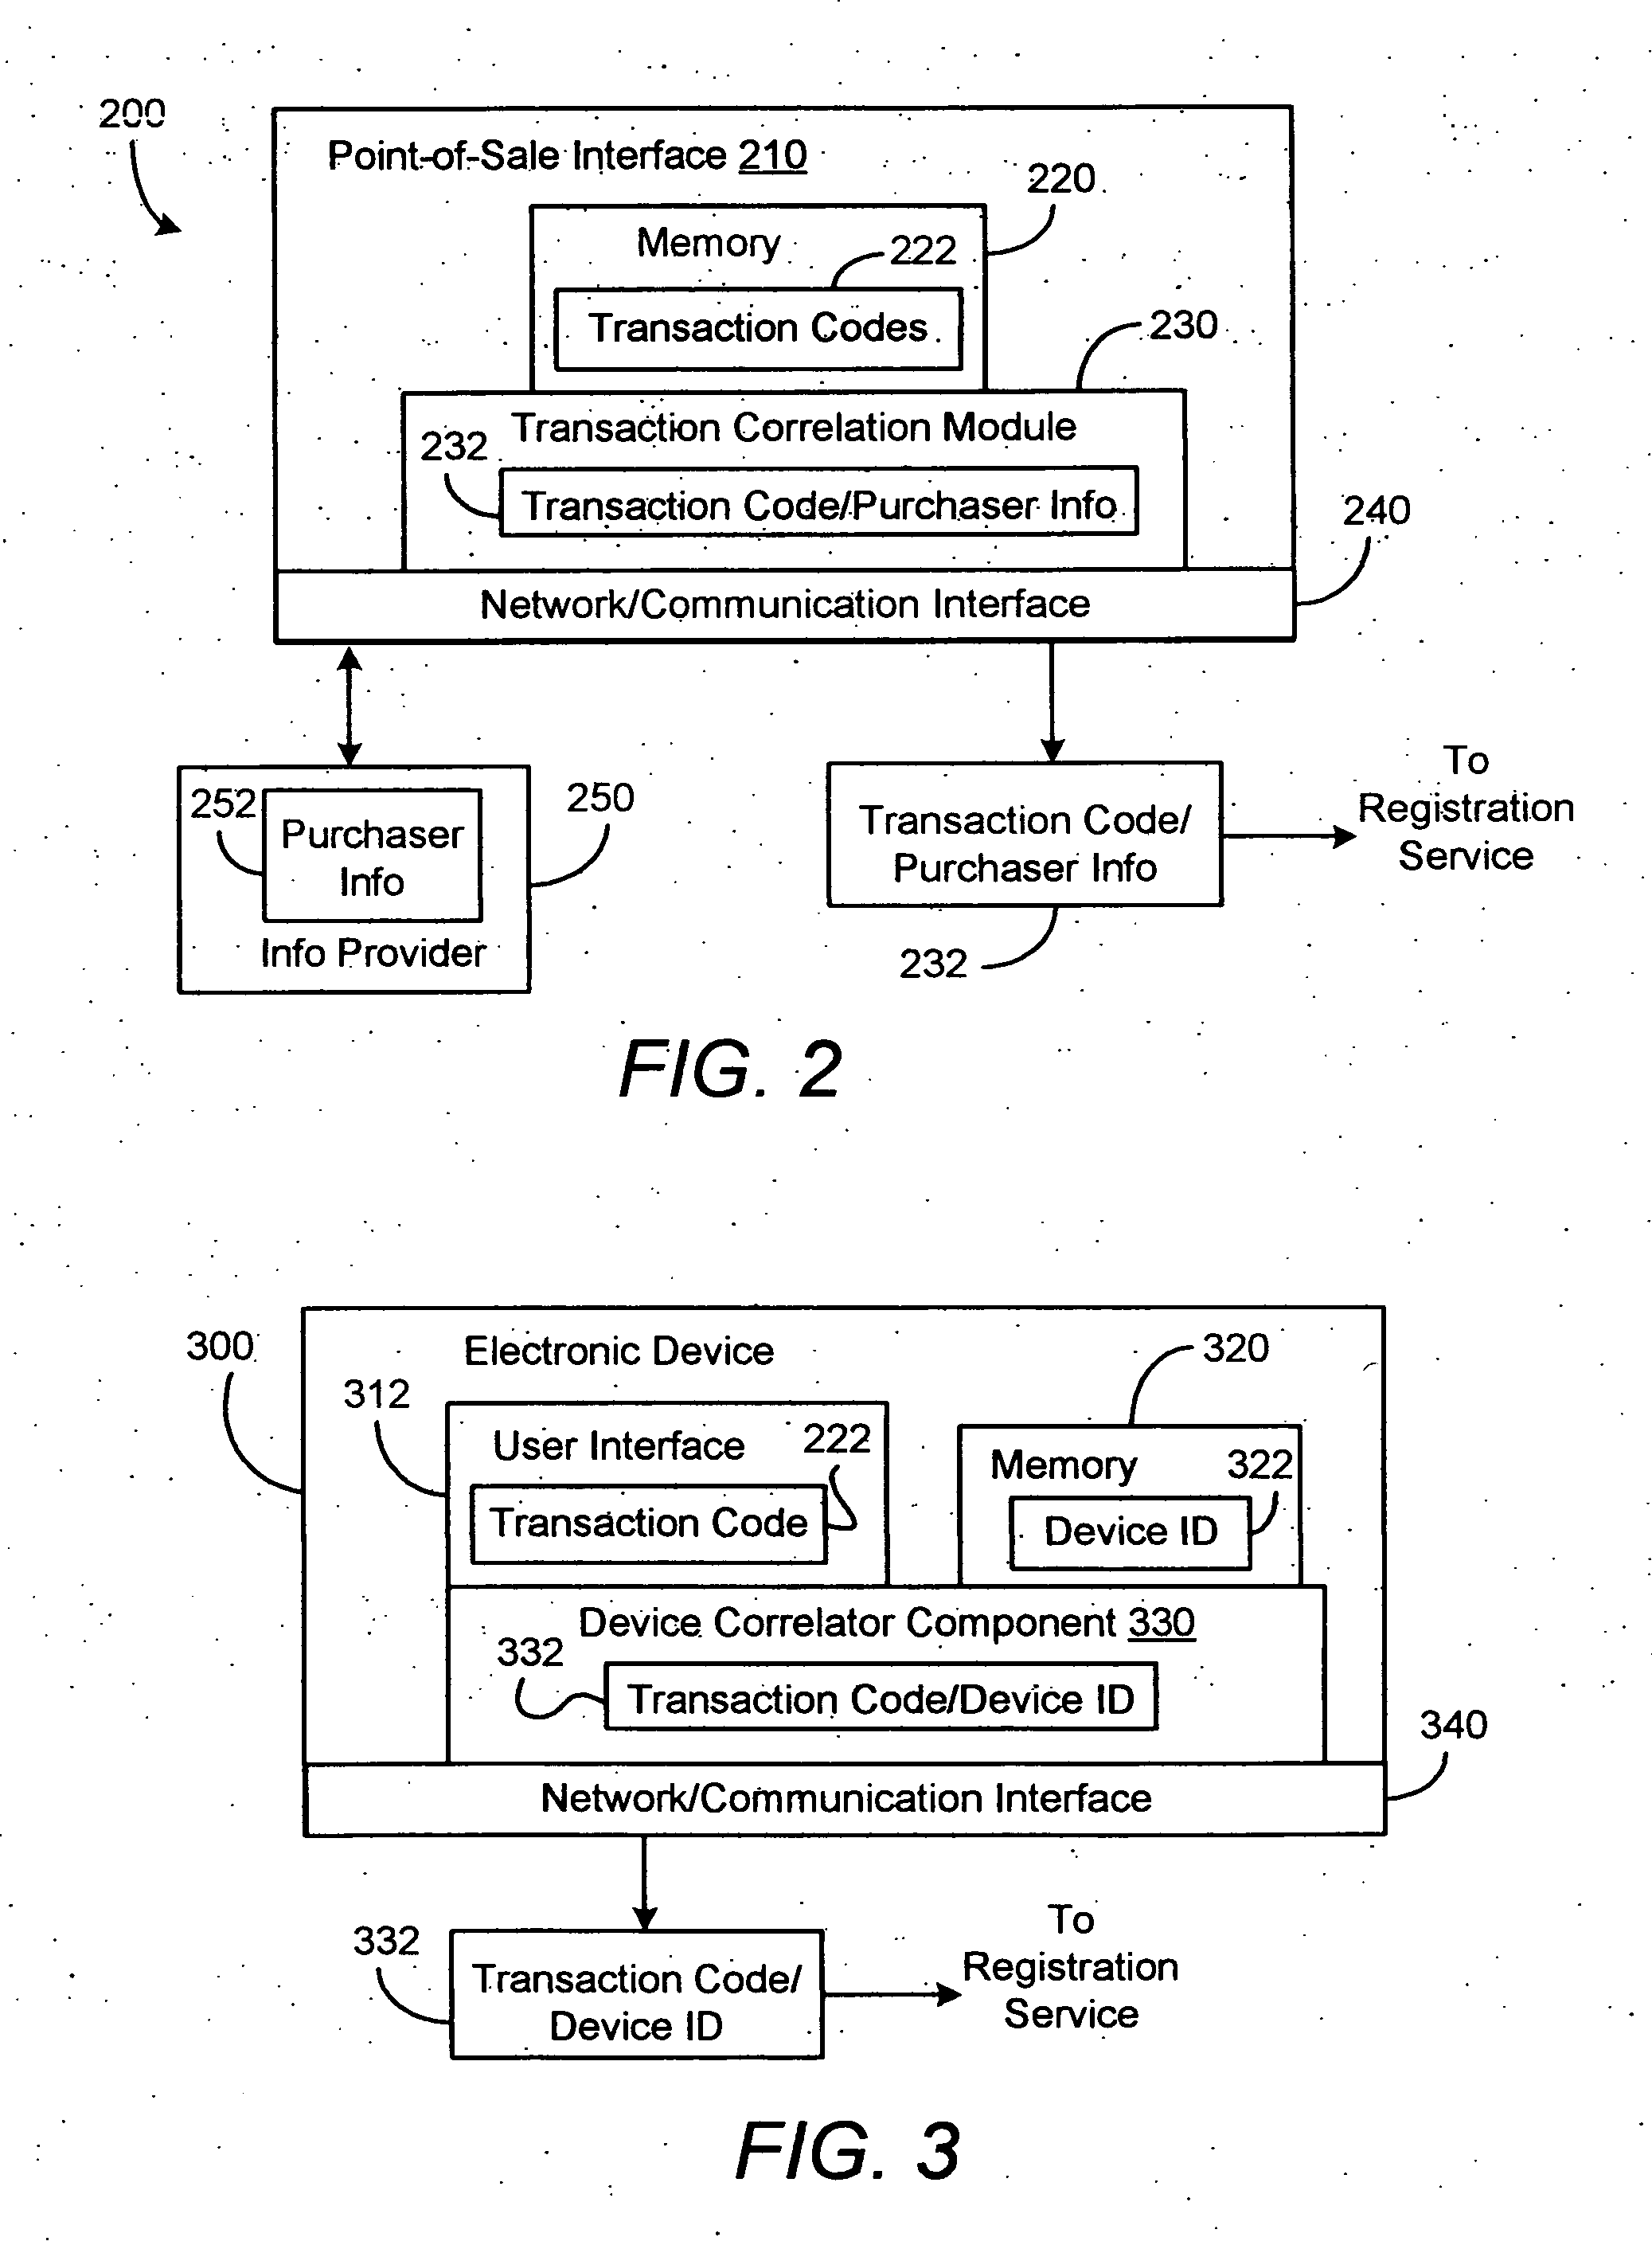 System and method for registration of an electronic device